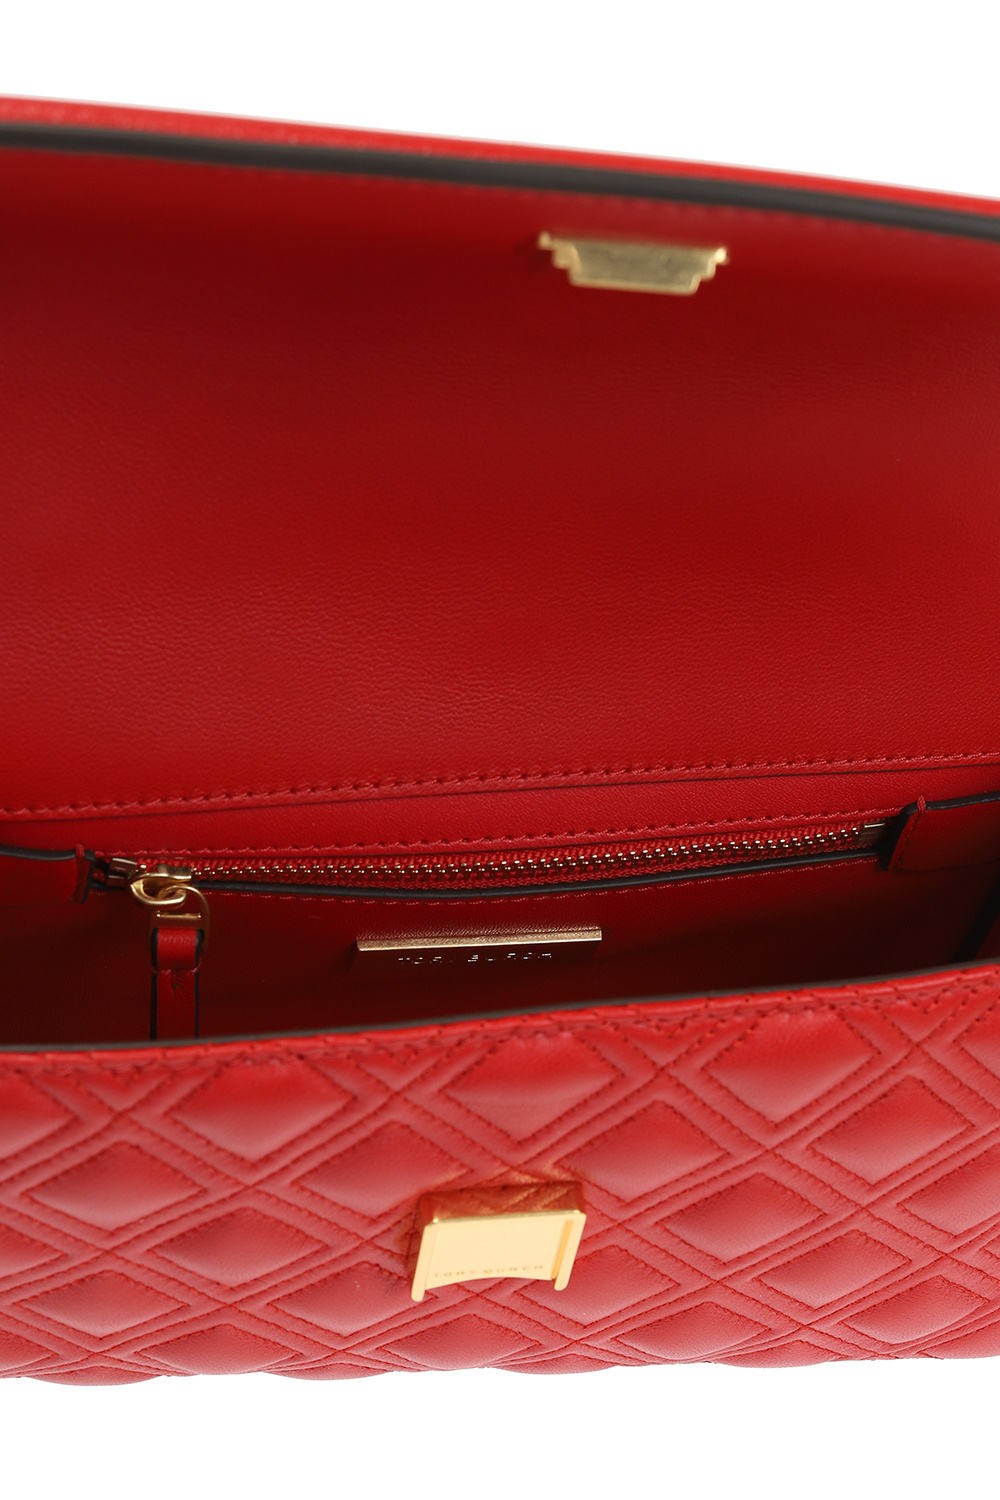 Tory Burch Fleming Small Shoulder Bag Red